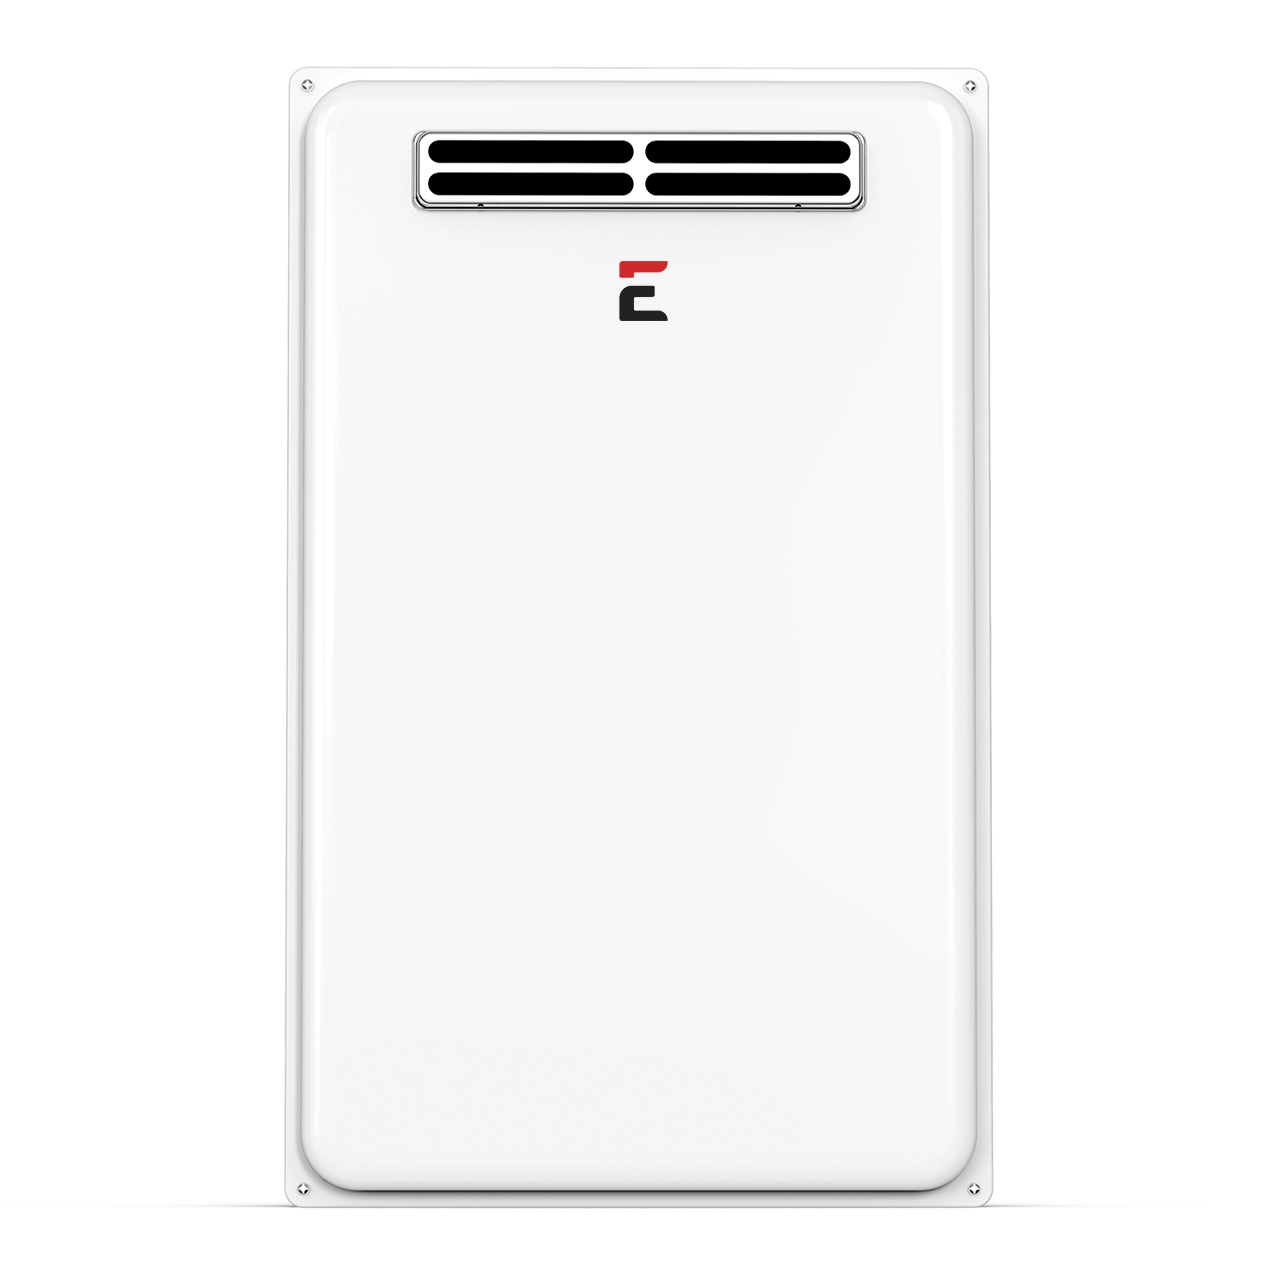 Eccotemp Builder Series Outdoor 6.8 GPM Natural Gas Tankless Water Heater